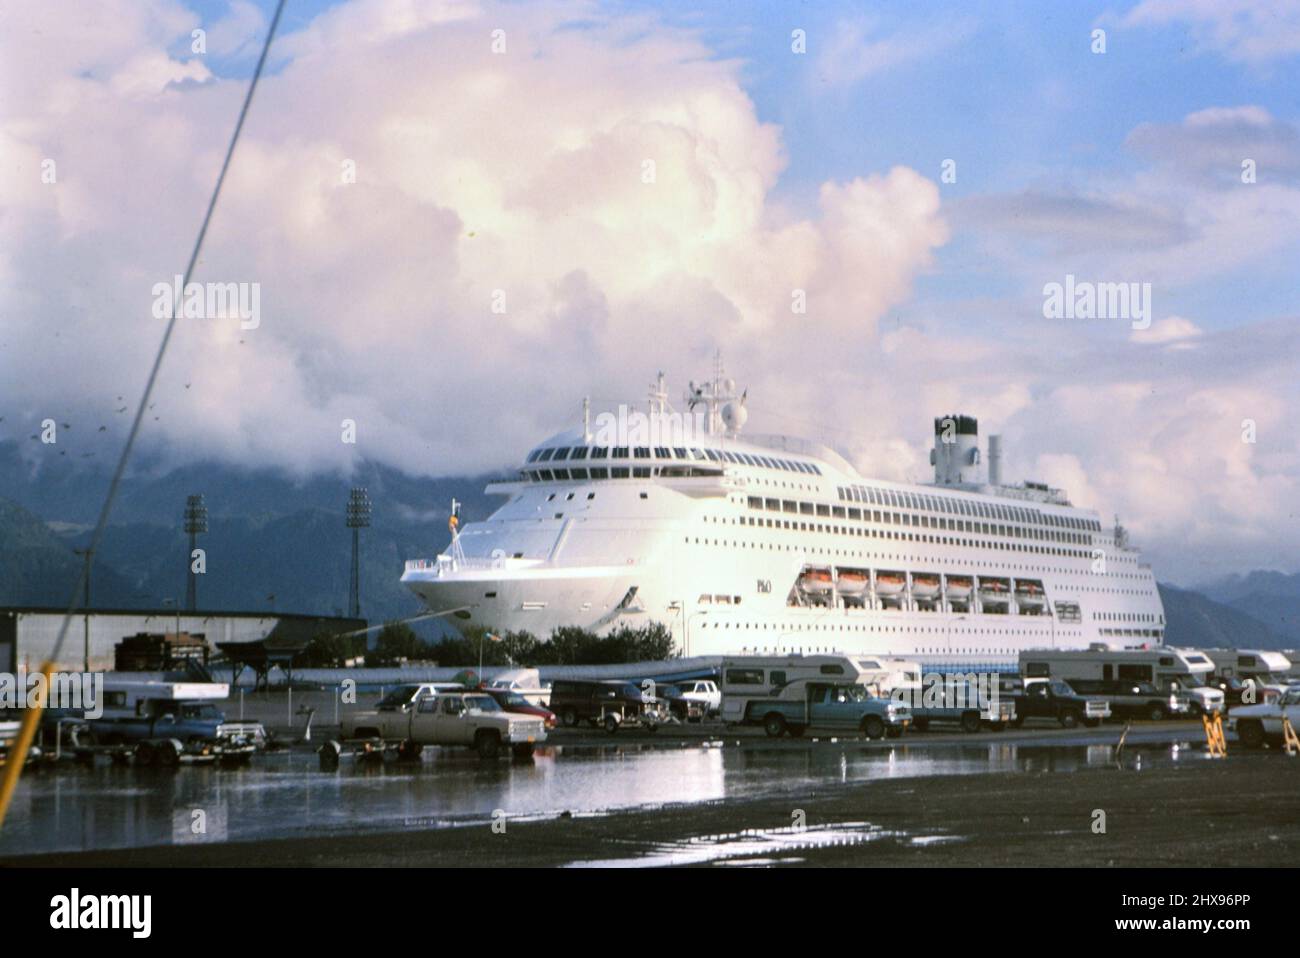 A P&O Cruise Ship docked in an unidentified city ca. 1996 Stock Photo